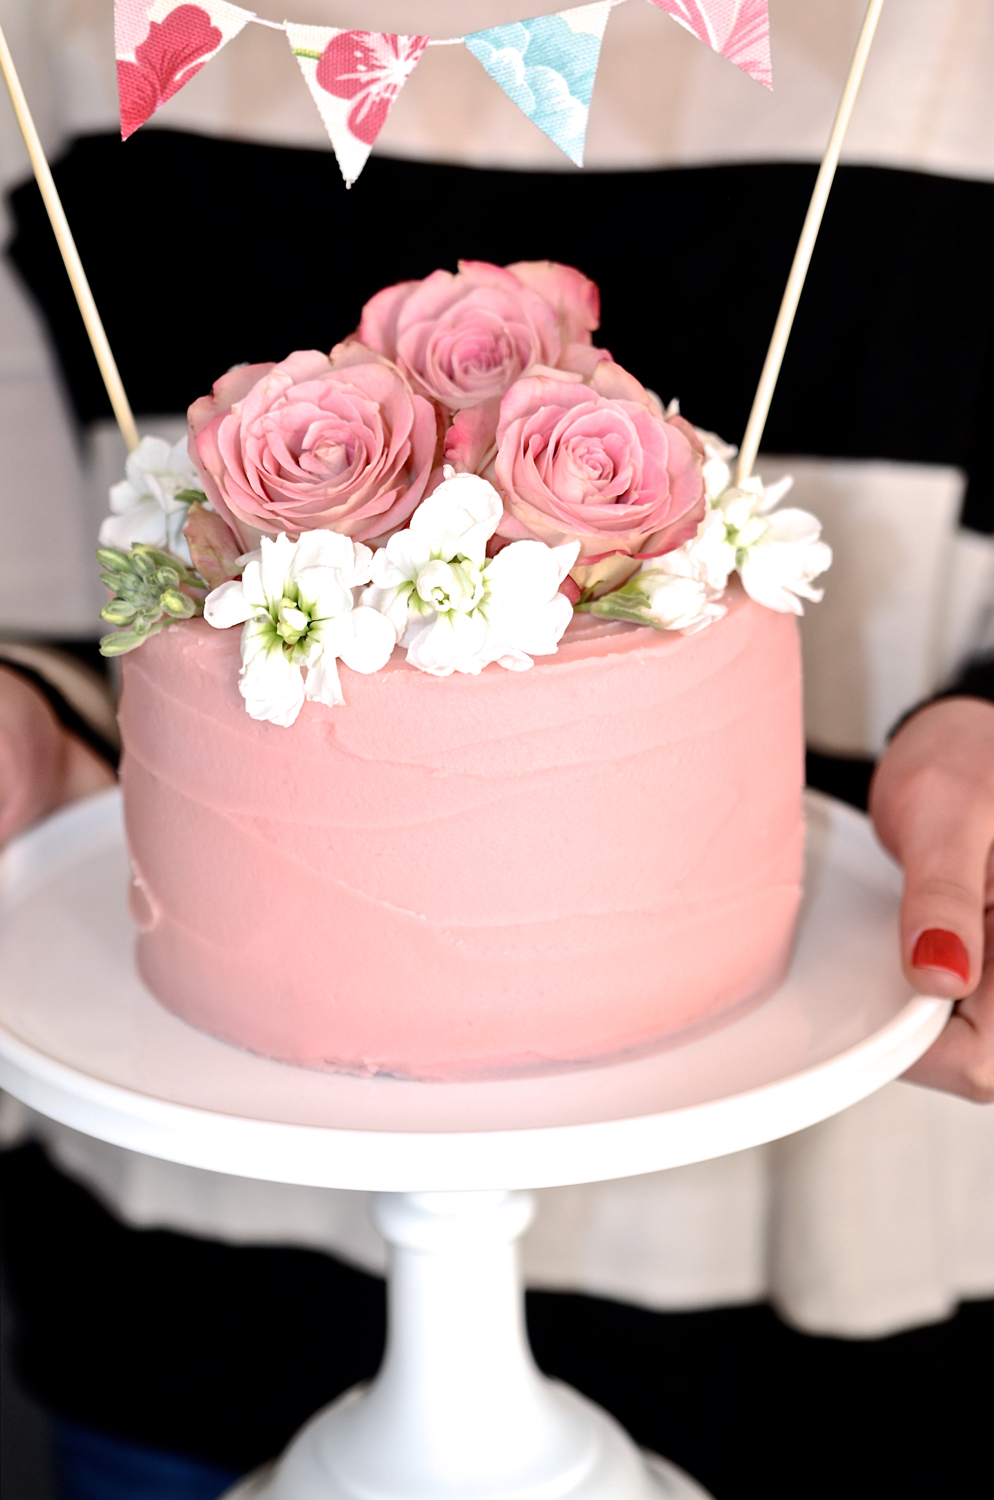 Ribbon Cake with Butter cream Flowers 500g – SUN ONLINE